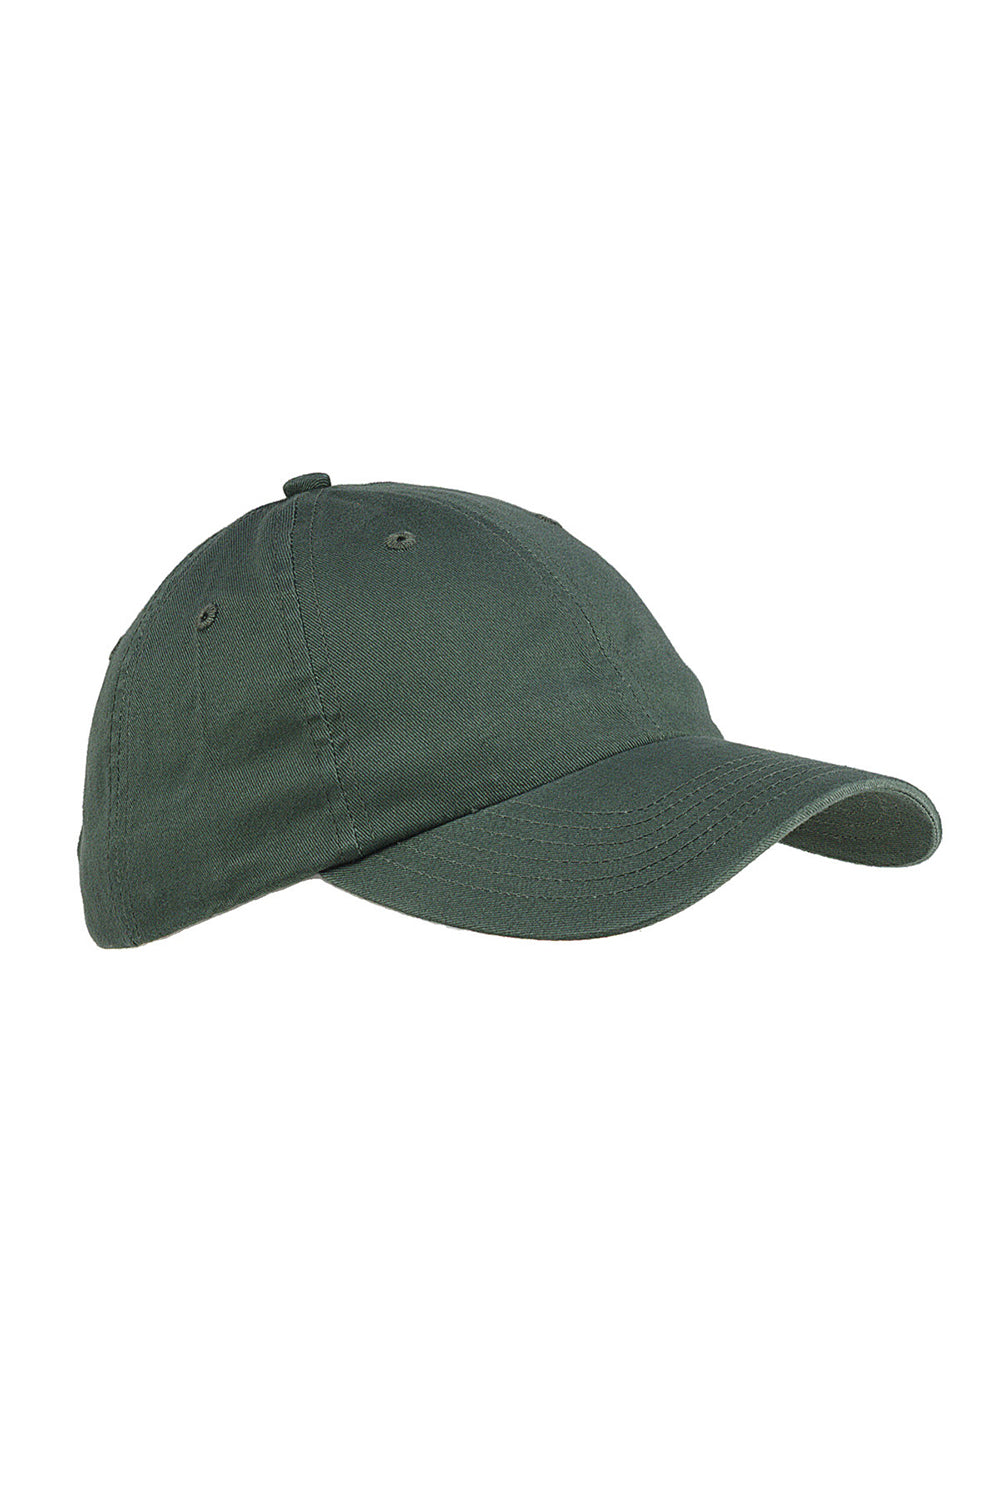 Big Accessories BX001 Mens Brushed Twill Adjustable Hat Olive Green Flat Front